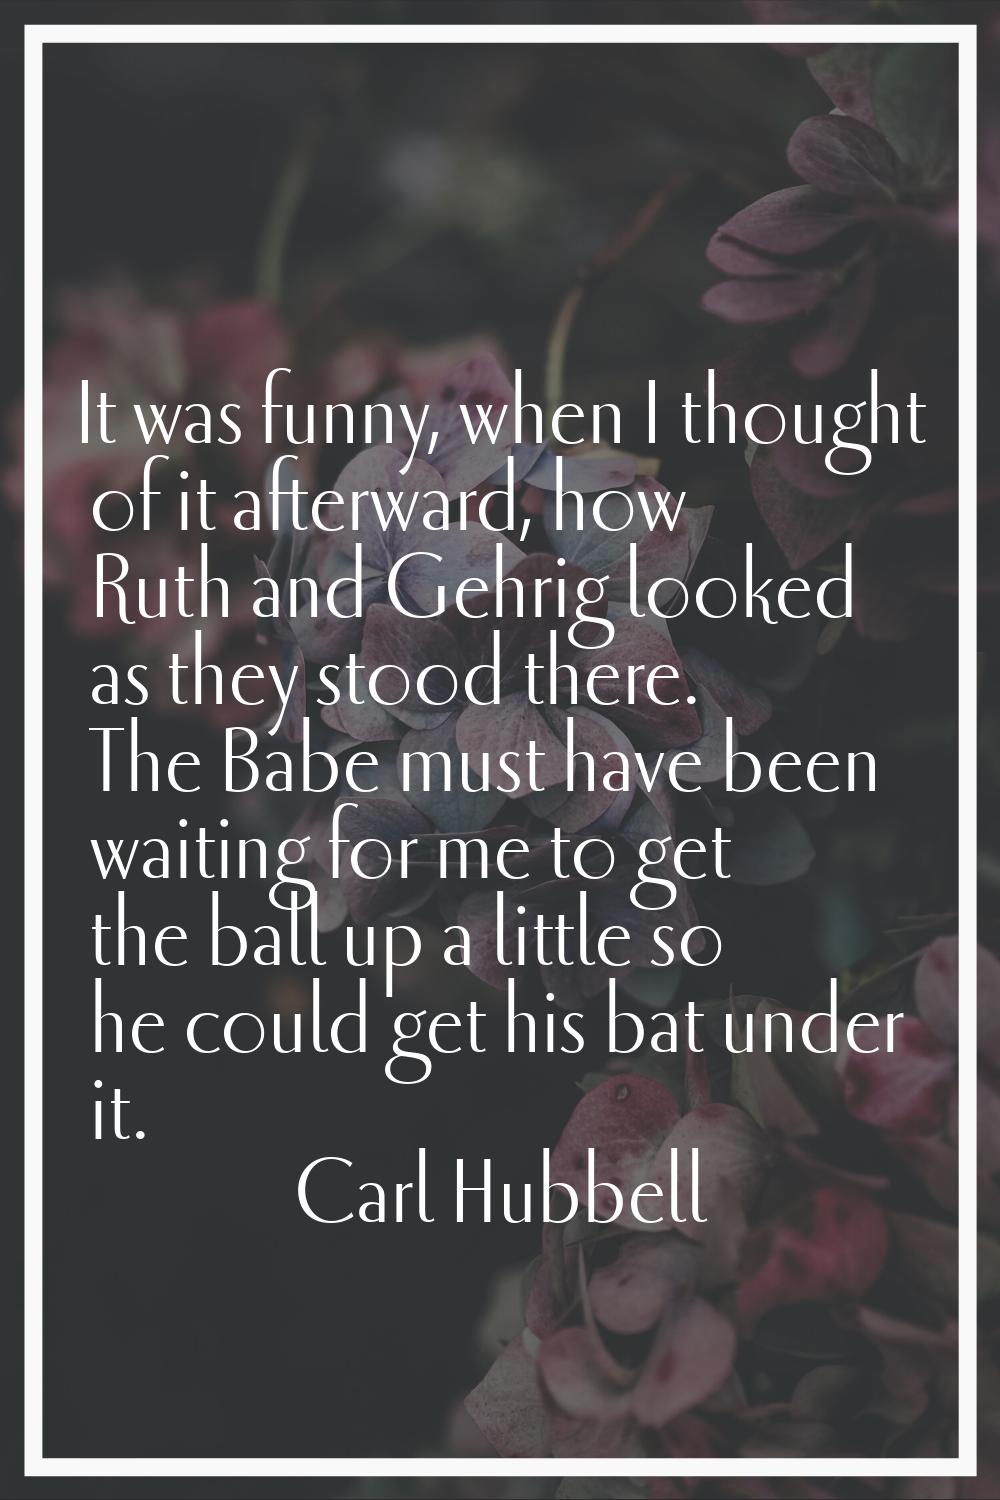 It was funny, when I thought of it afterward, how Ruth and Gehrig looked as they stood there. The B